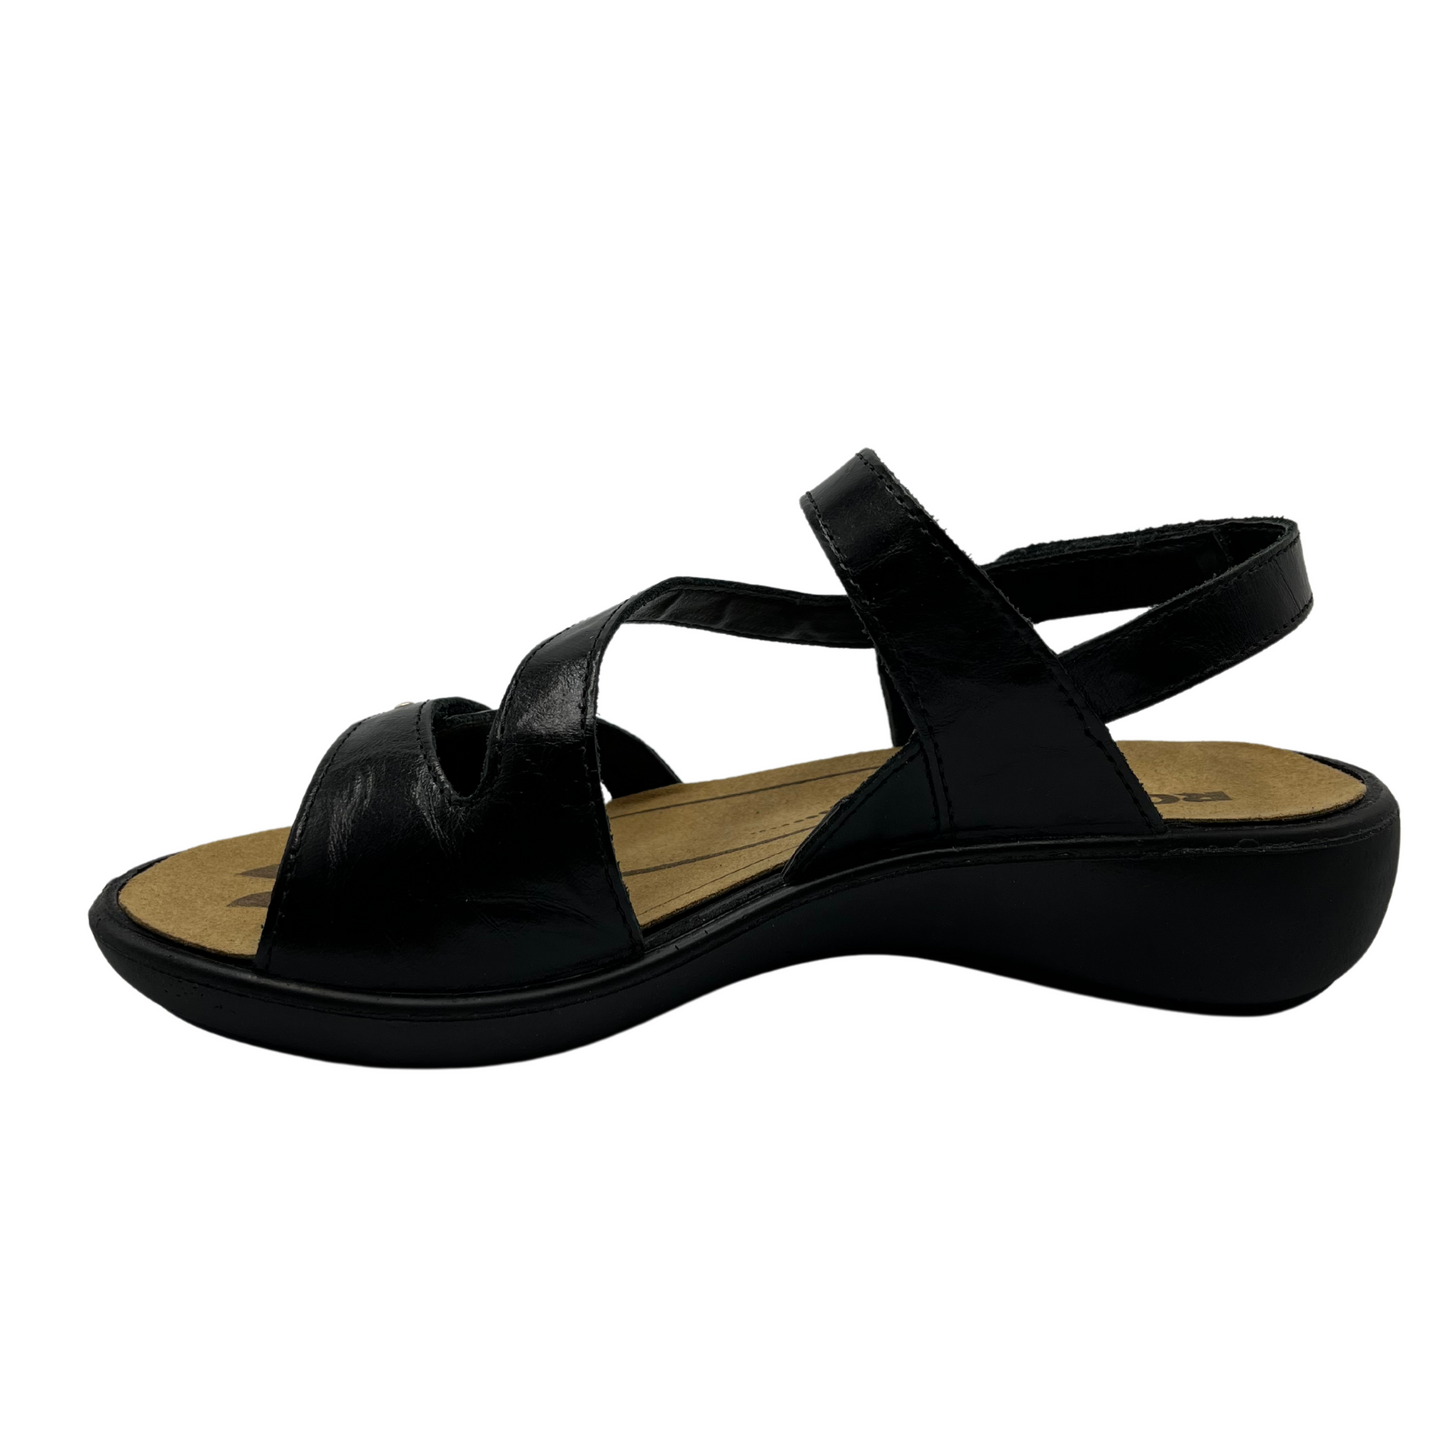 Left facing view of black leather sandal with brown lining and silver studs on straps